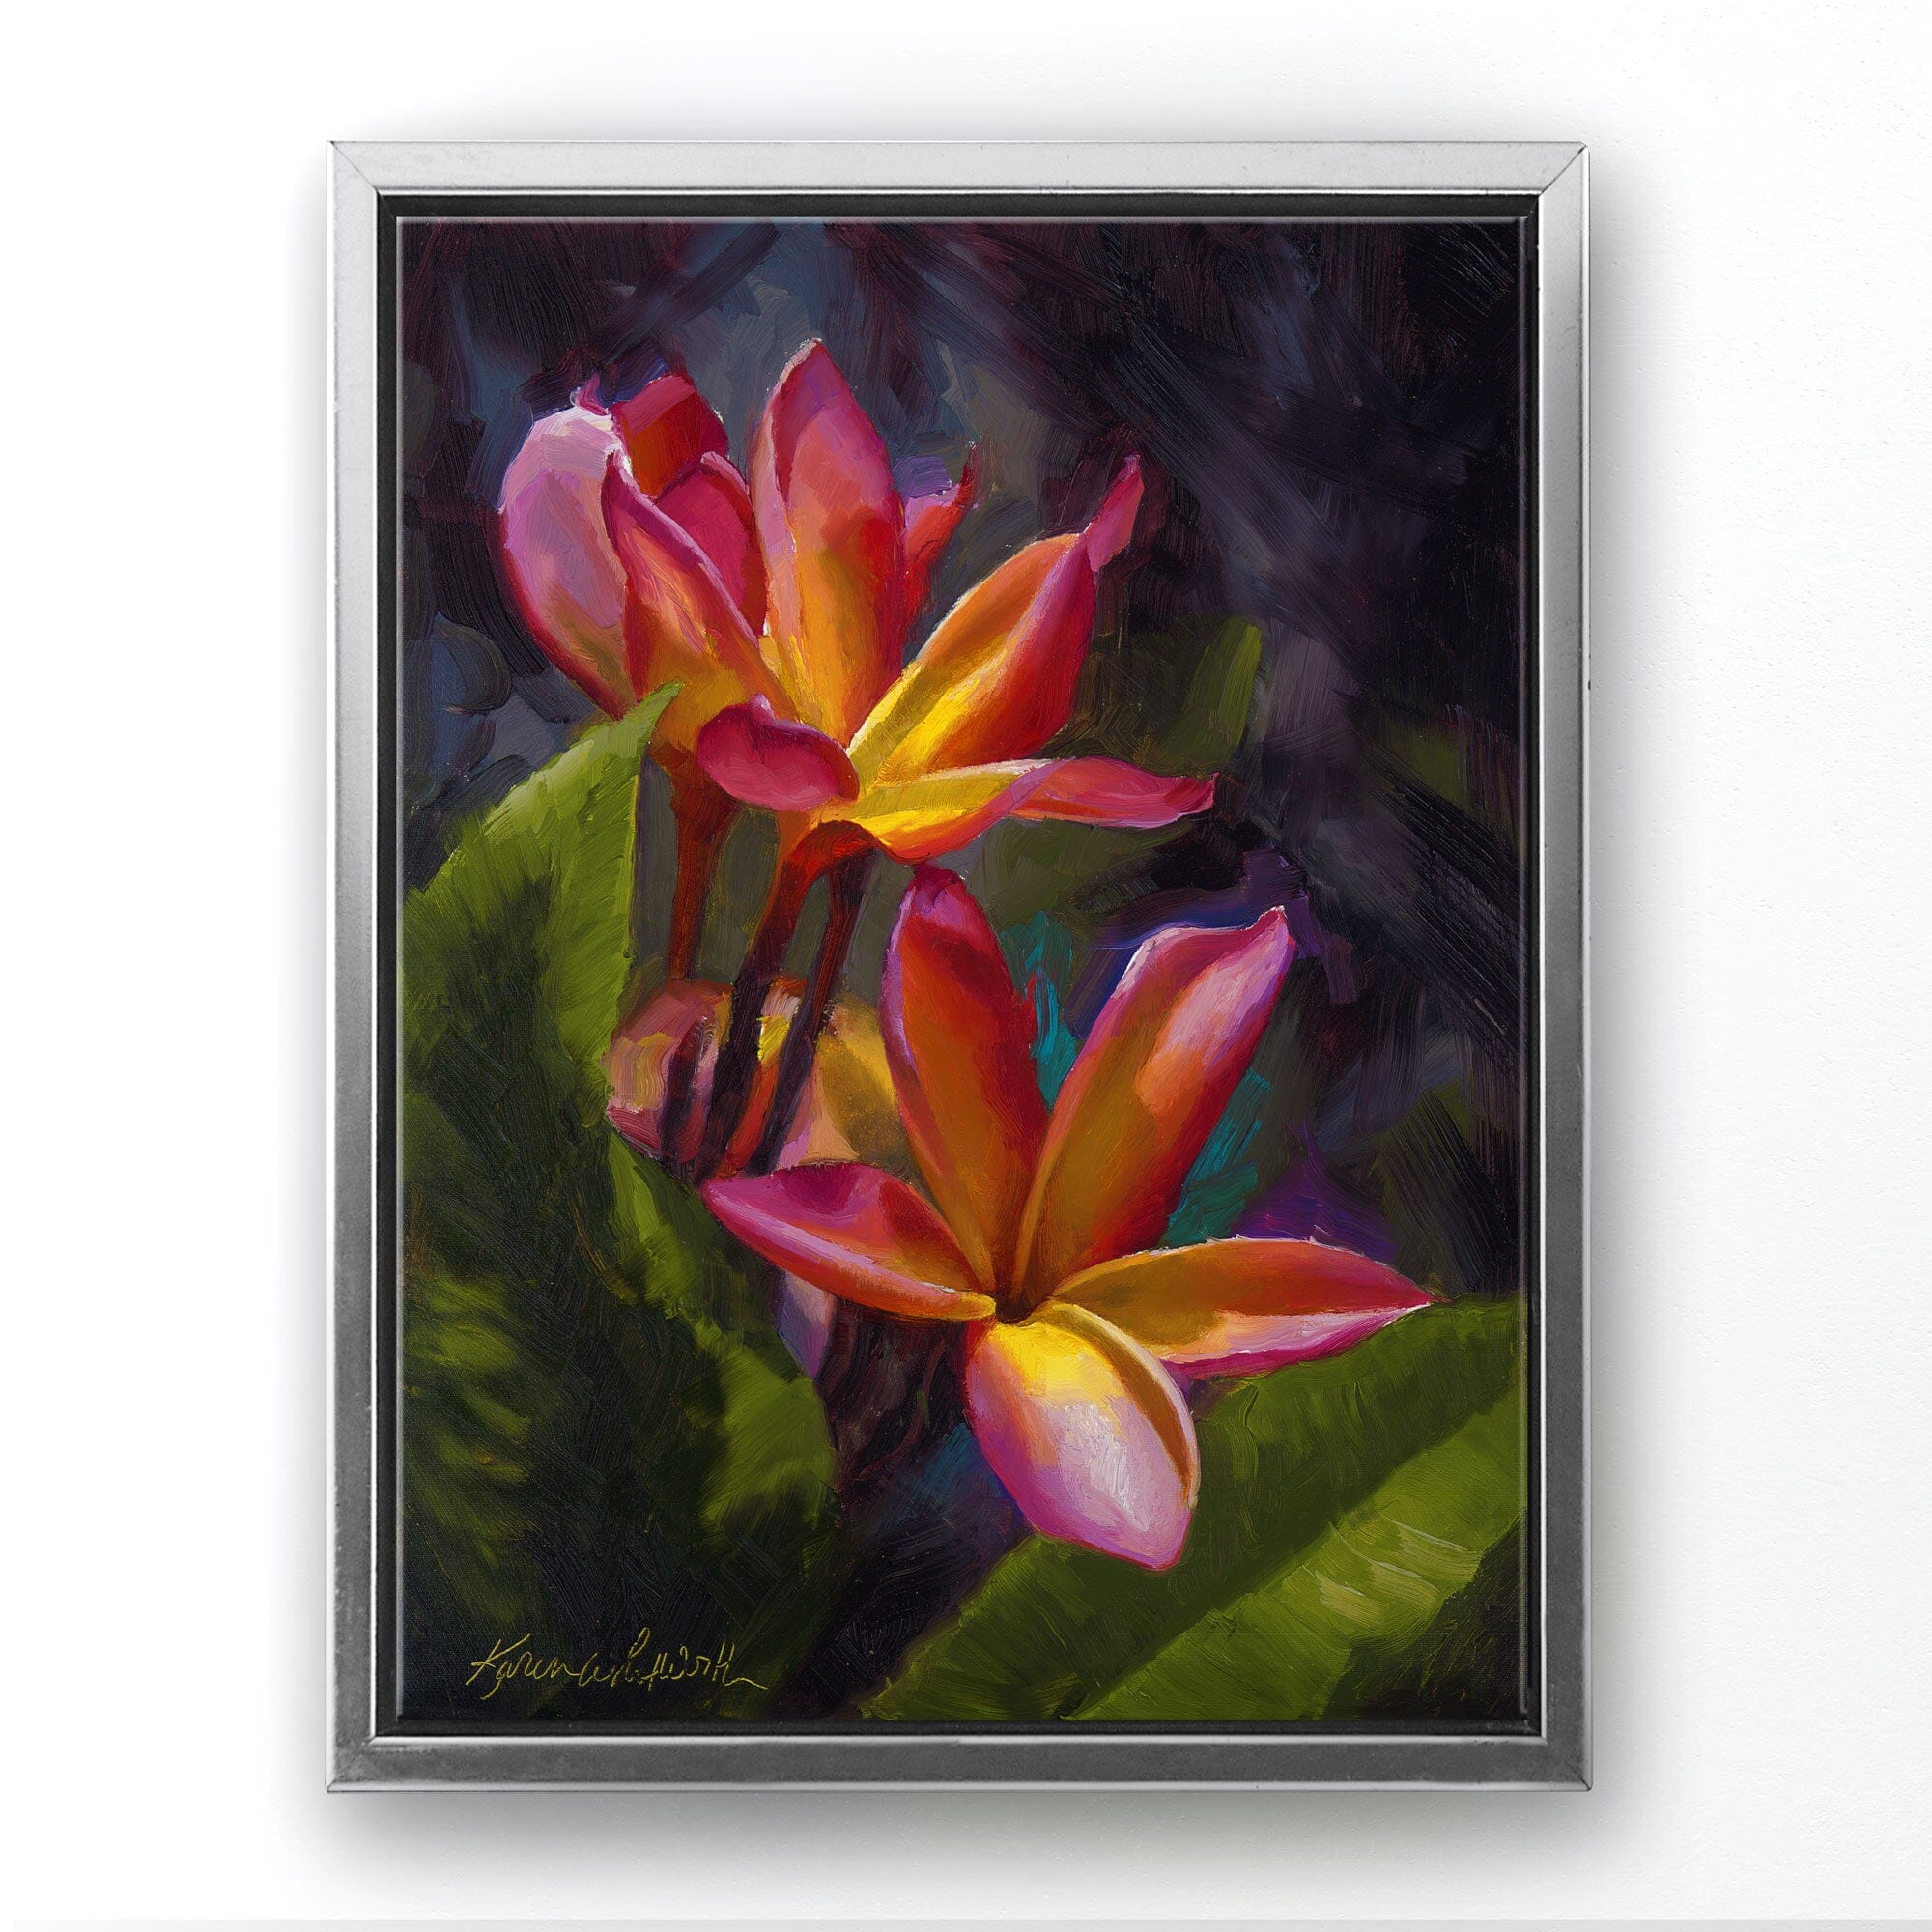 Tropical plumeria canvas art of Hawaii floral painting by artist Karen Whitworth. The canvas is framed in a Silver floater frame and is hanging on a white wall.